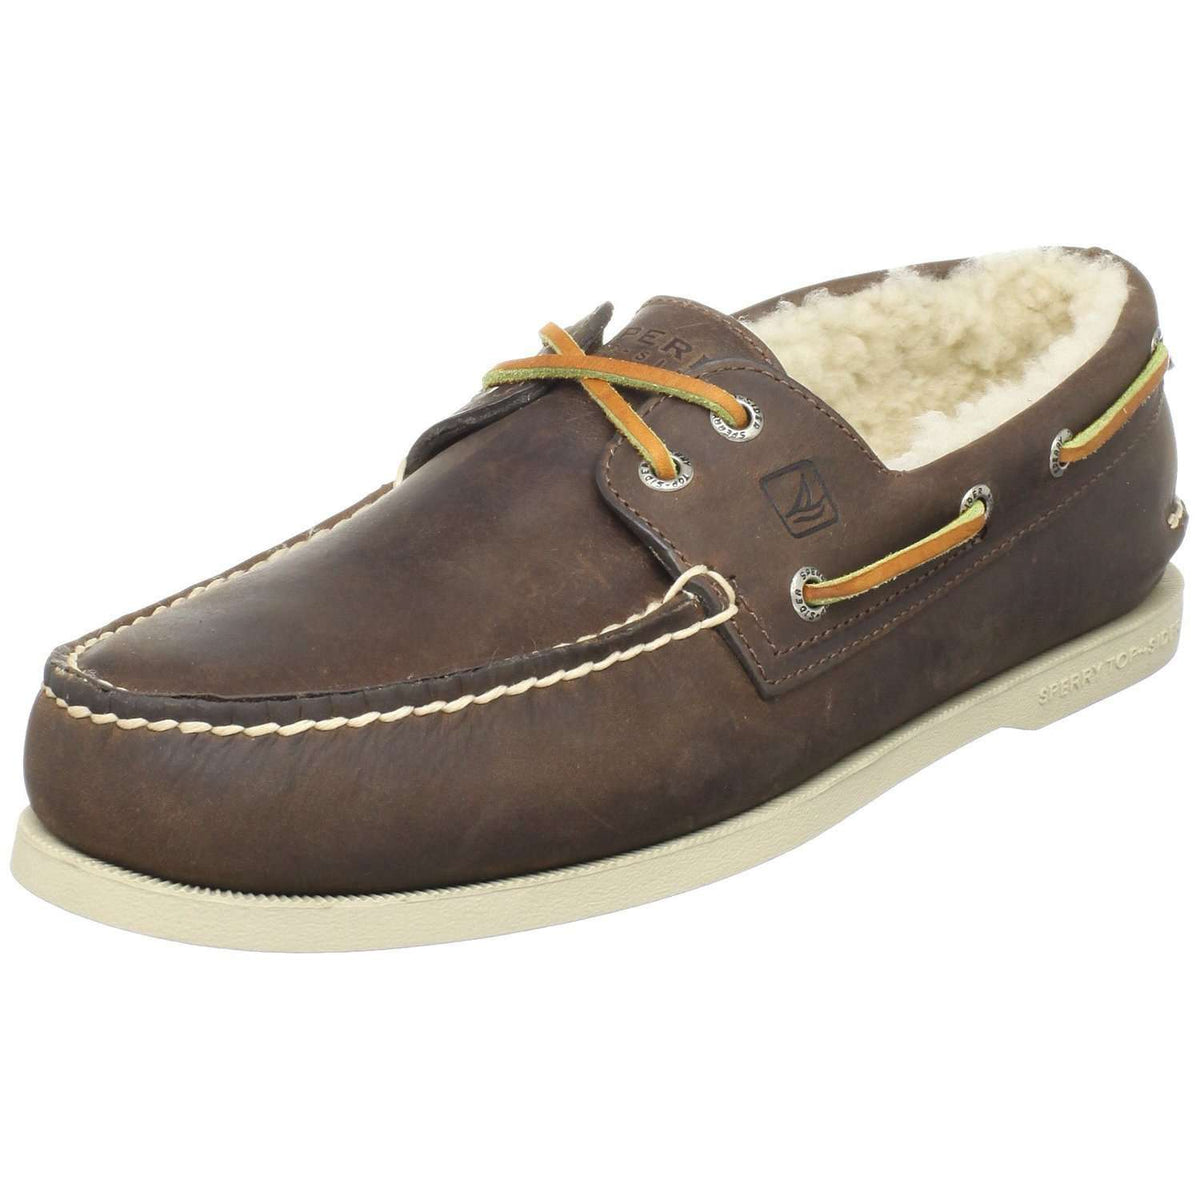 Men's Authentic Original Winter Boat Shoe in Dark Brown by Sperry - Country Club Prep